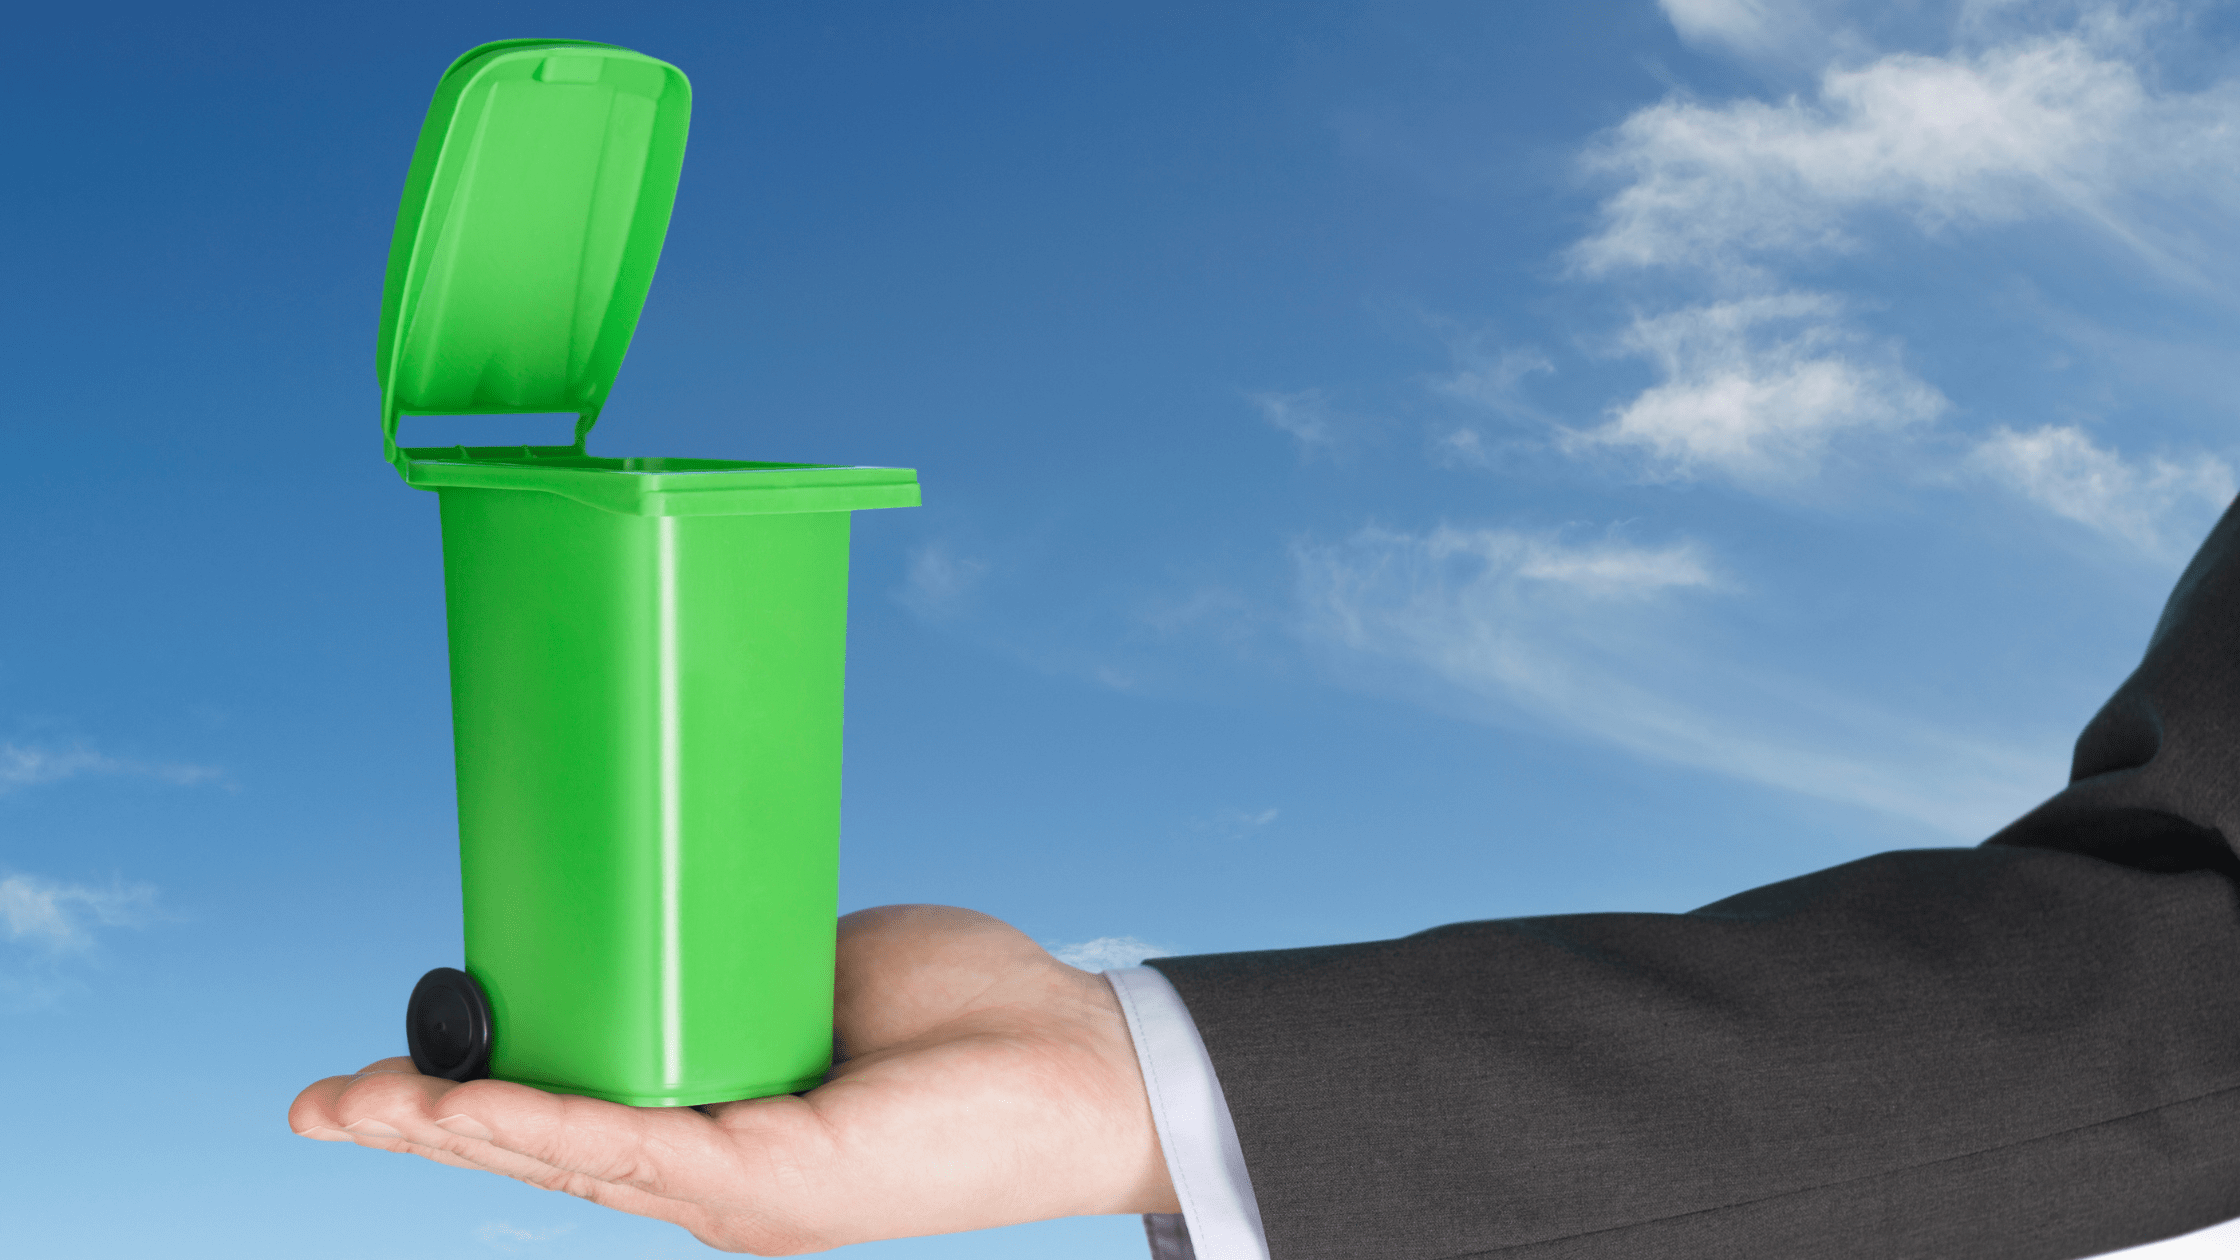 Business man in a suit holding a green bin to represeant sustainable waste management